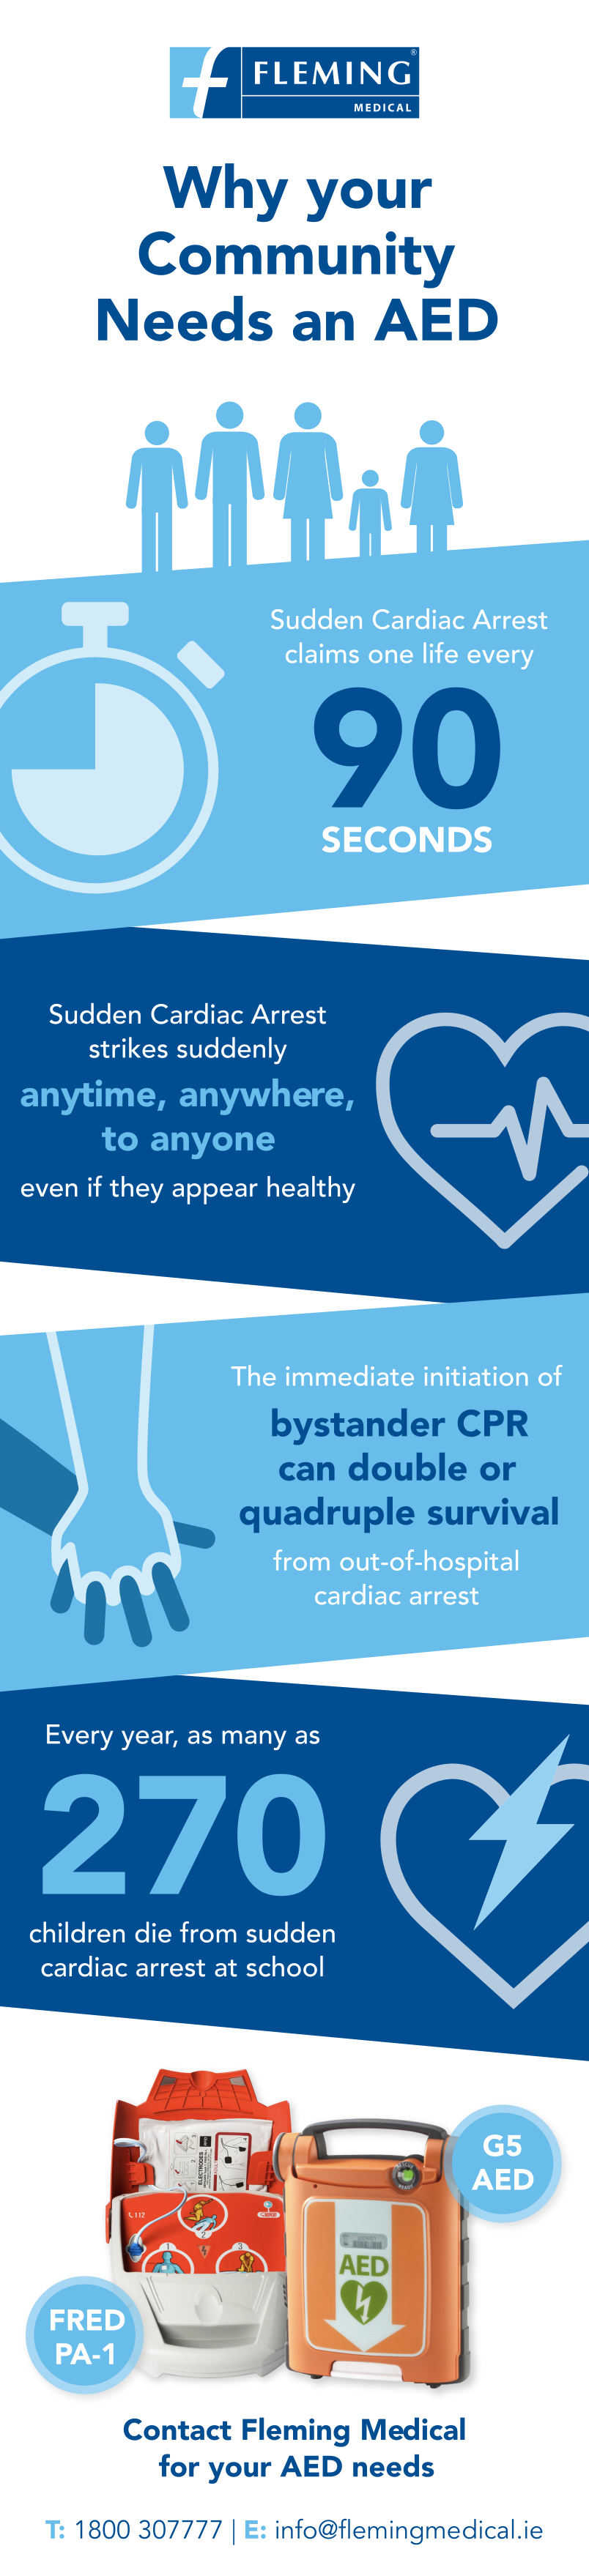 Why Your Community Needs an AED - Infographic